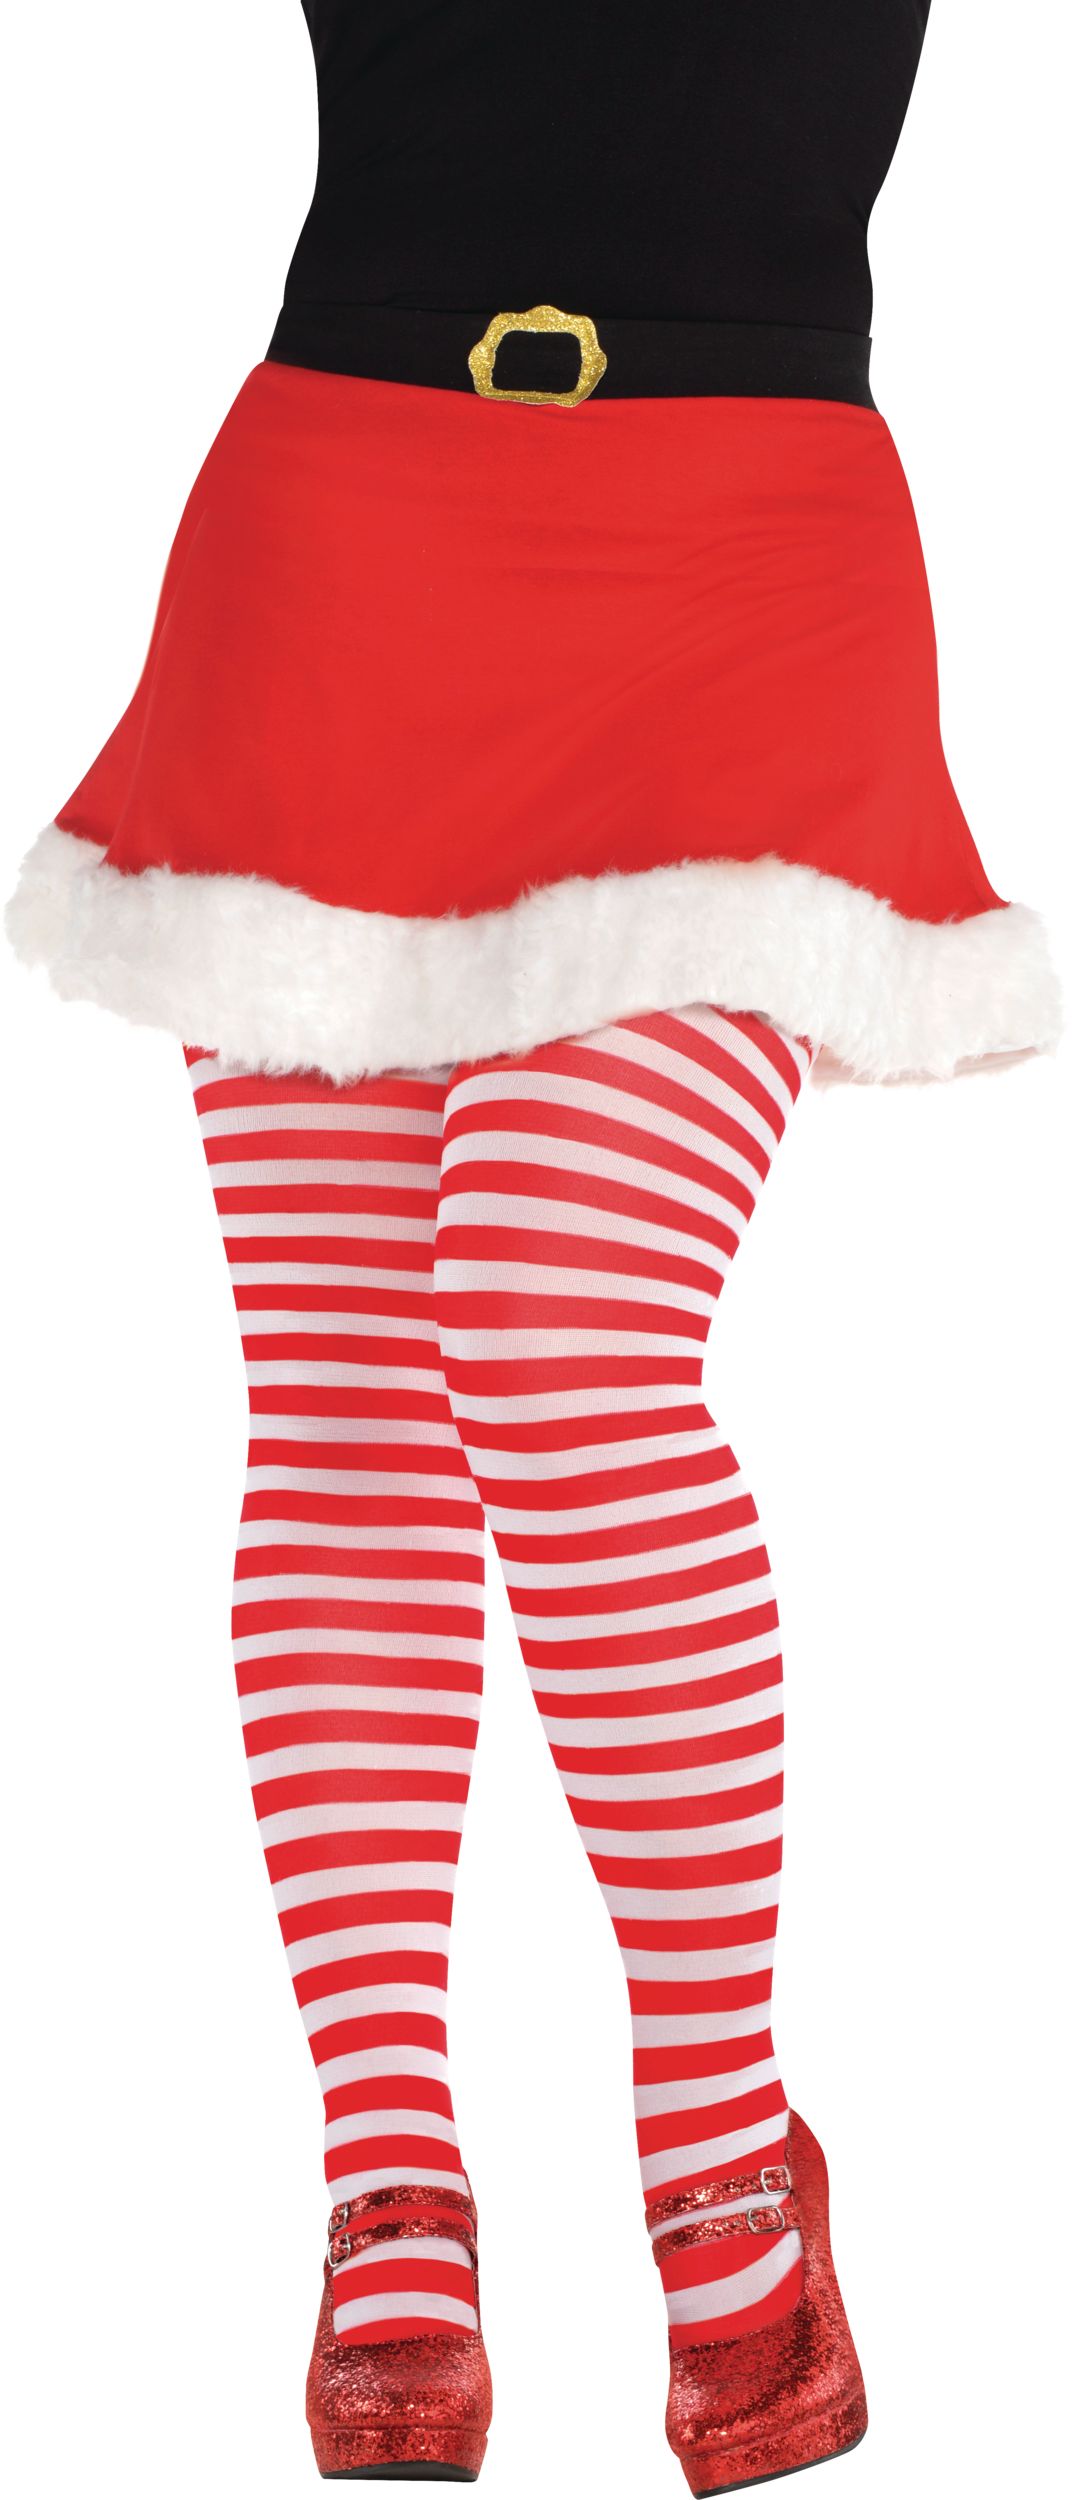 Red & White Striped Tights, Adult, Plus Size